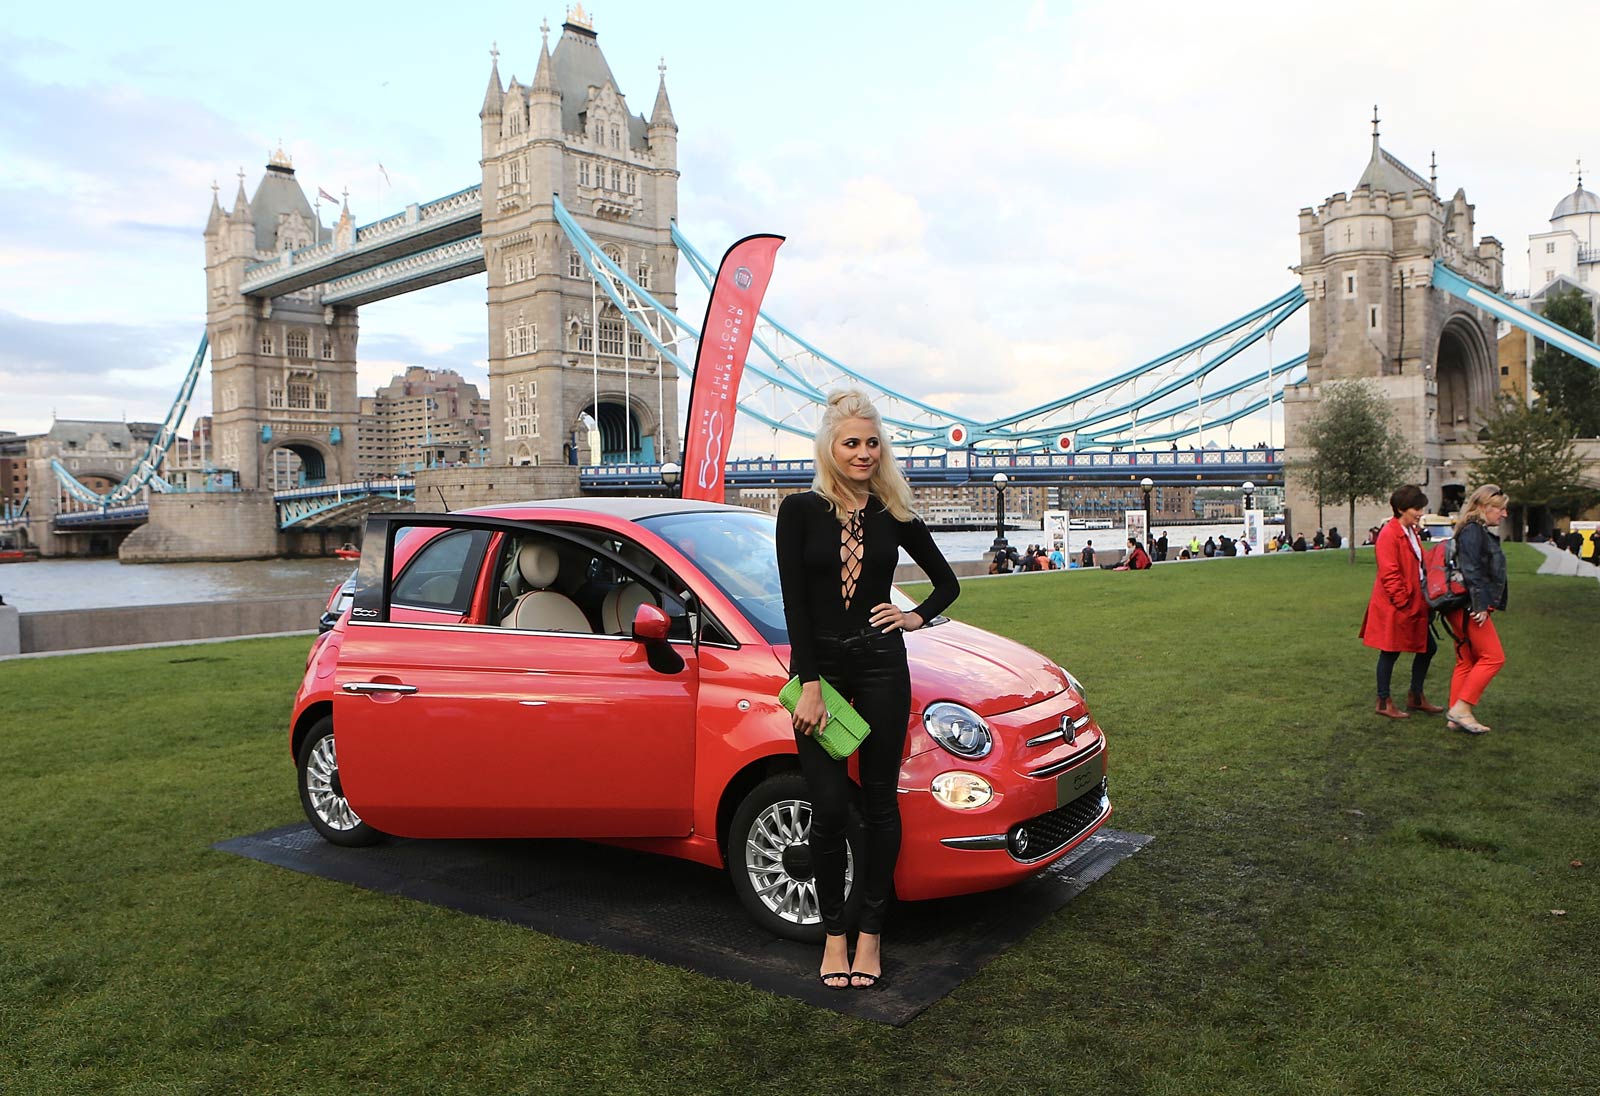 Pixie Lott attends launch of the new Fiat 500